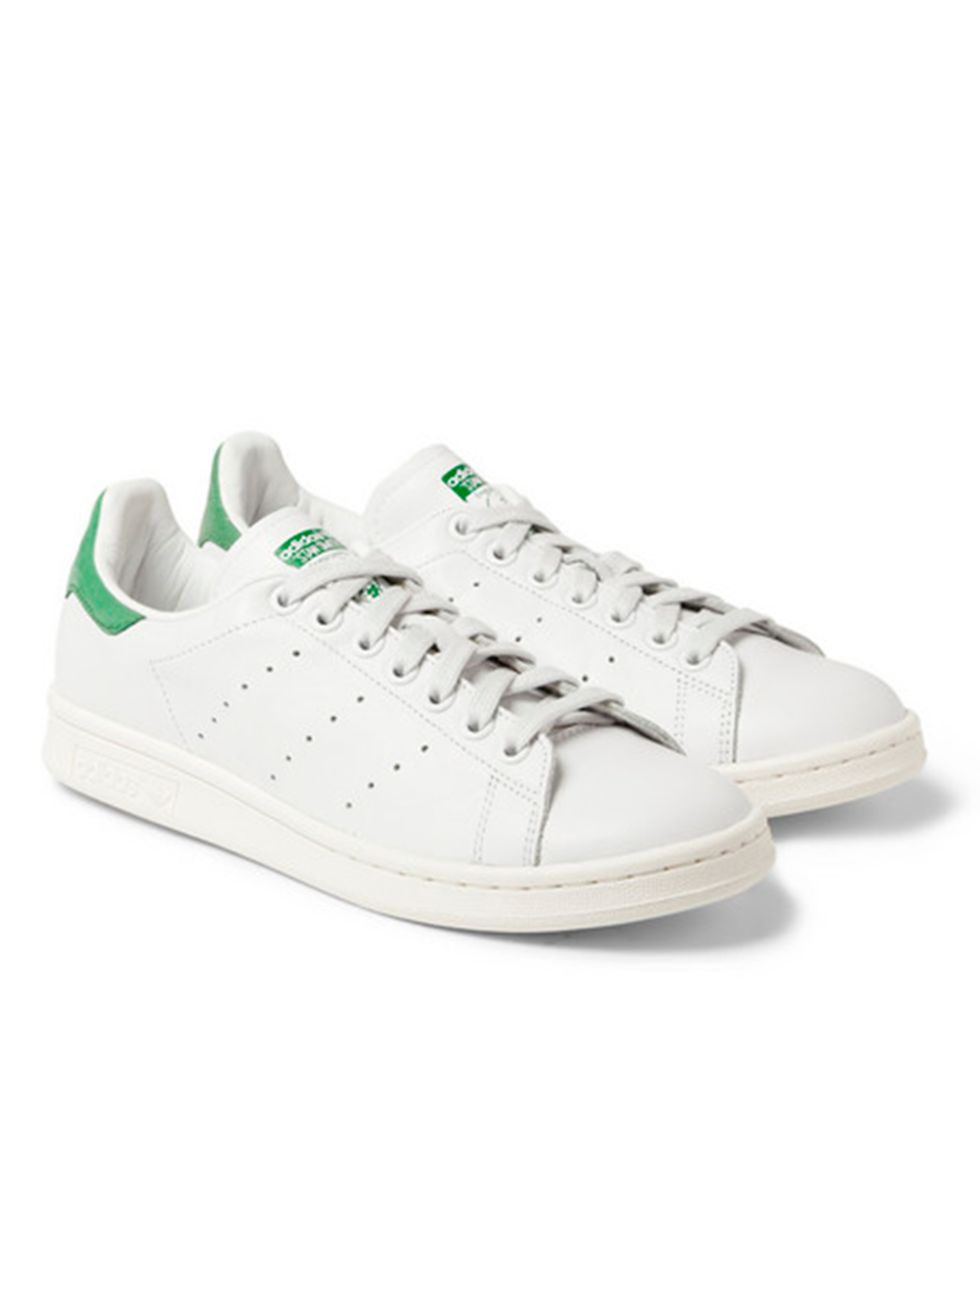 <p>Adidas Stan Smith trainers, £66.99 at <a href="http://www.office.co.uk/view/product/office_catalog/5,21/2143111993" target="_blank">Office </a></p>